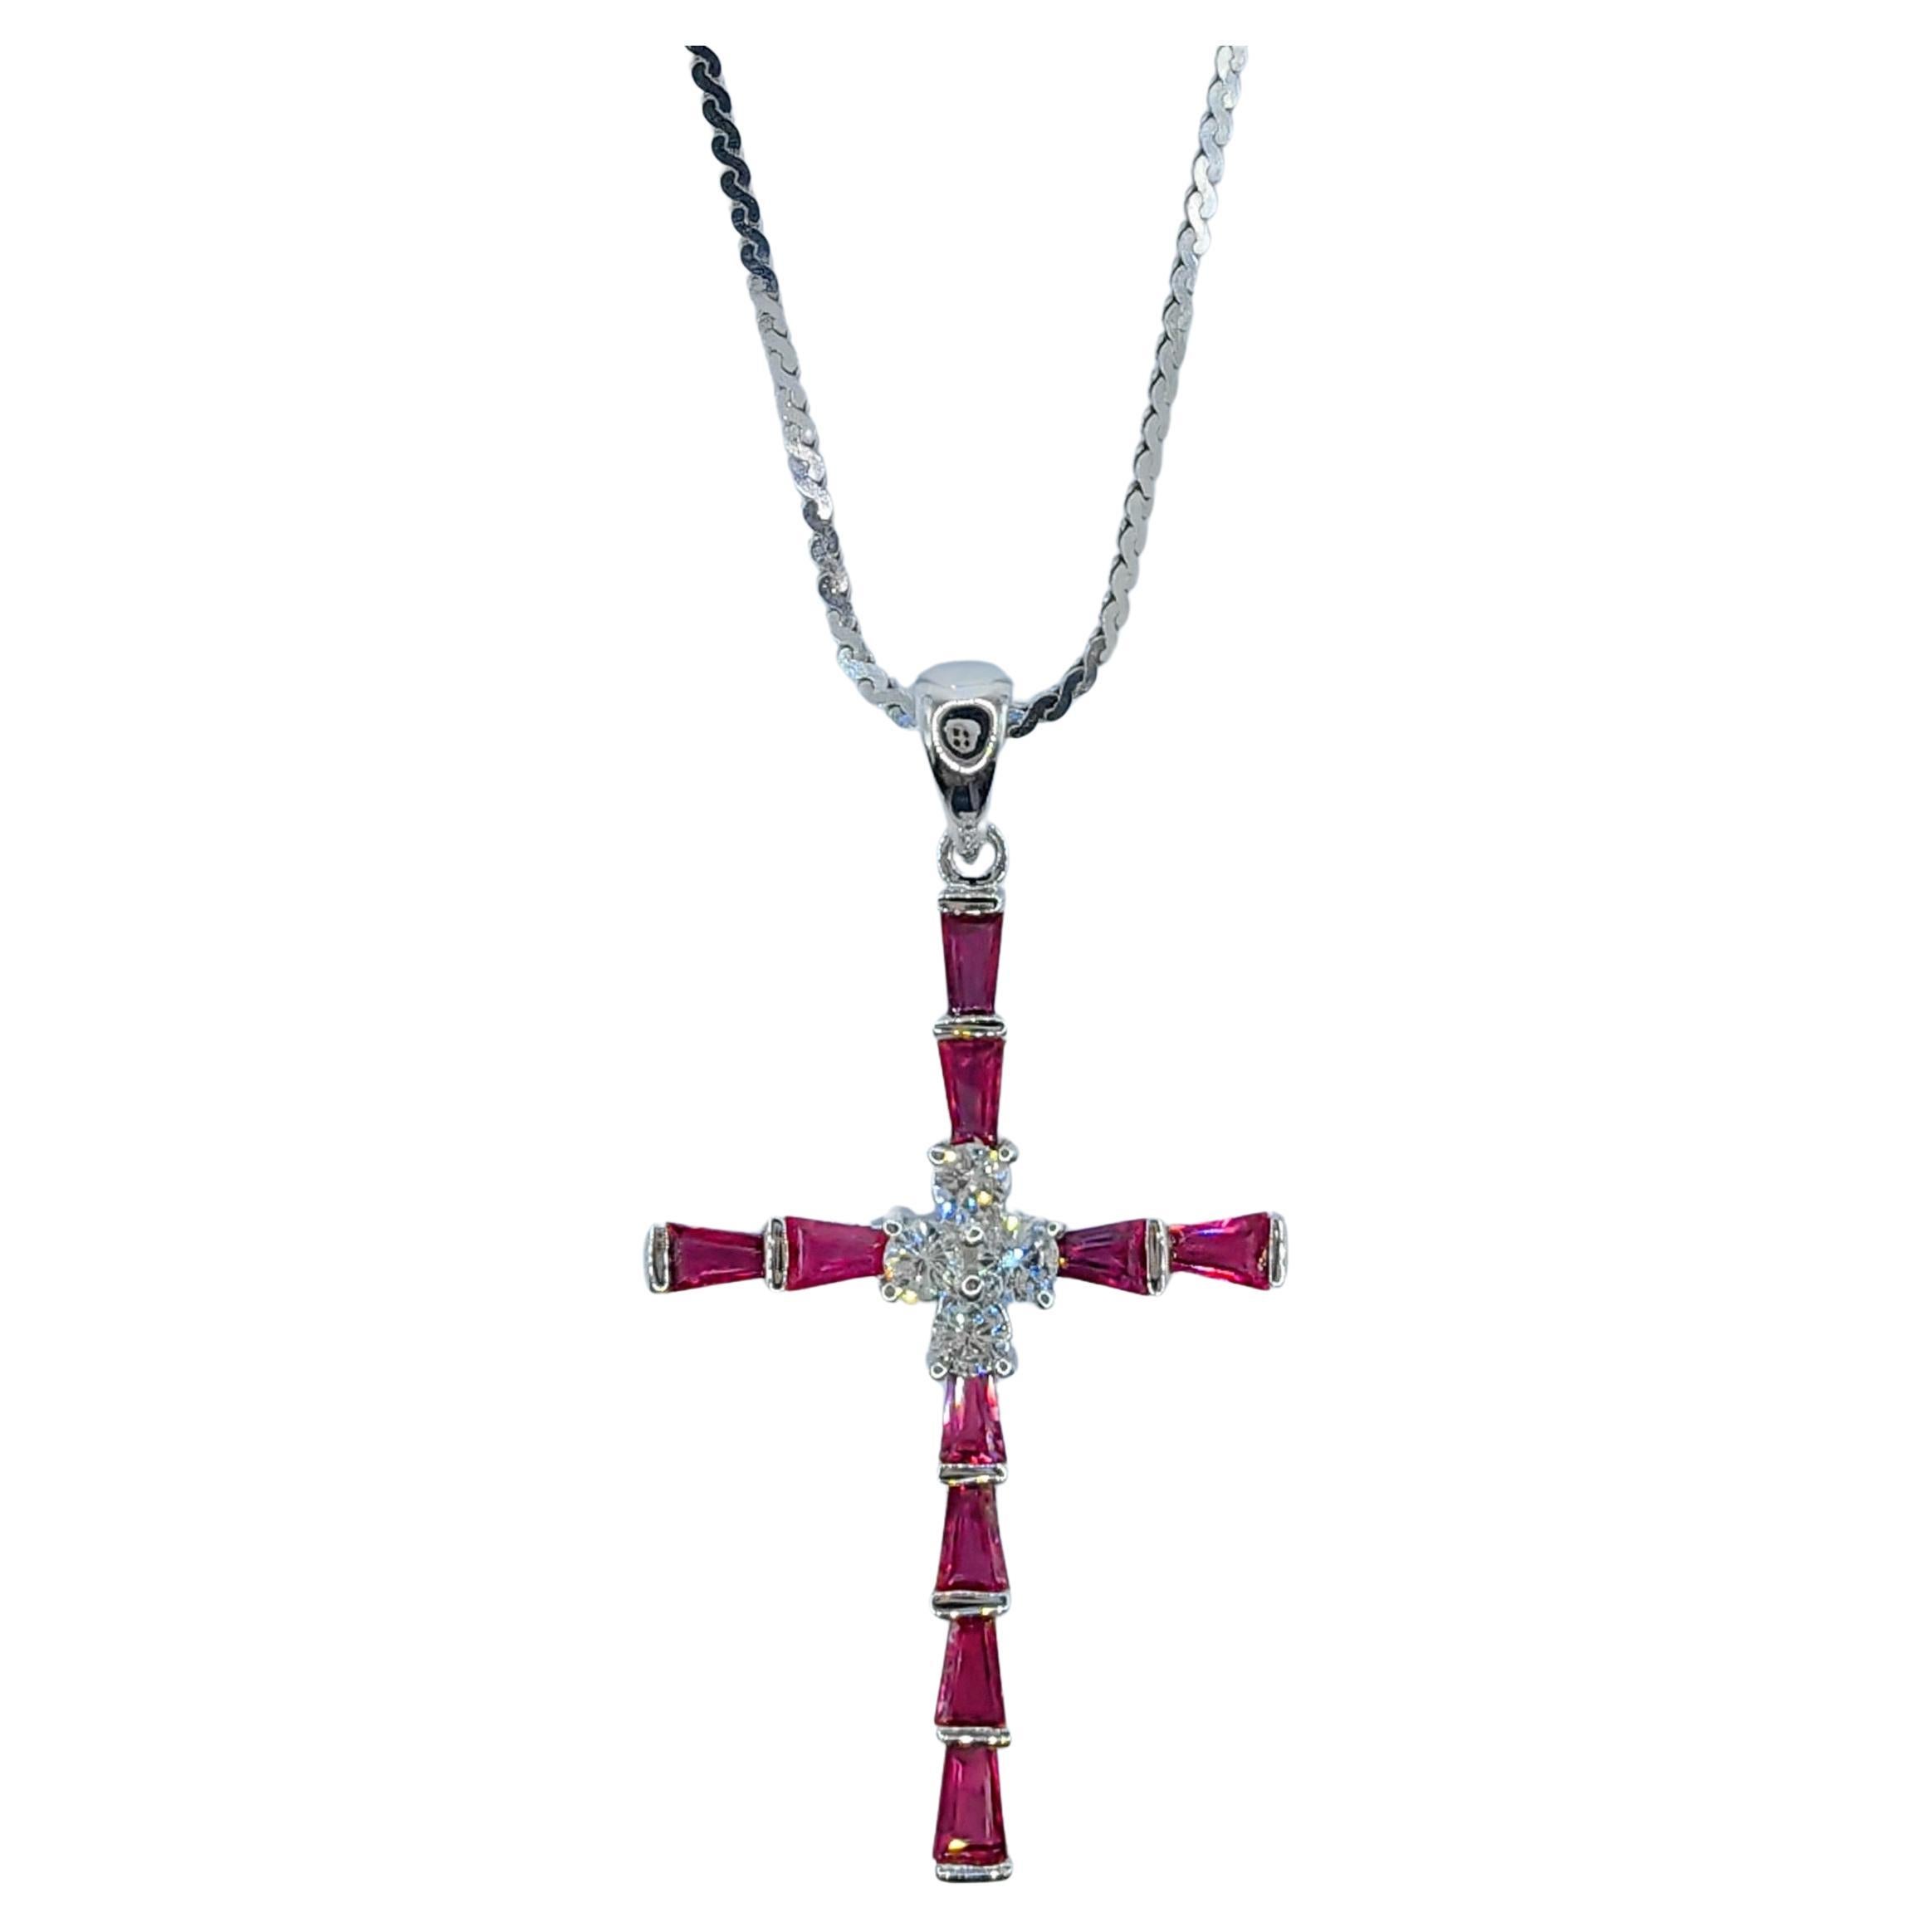 1.26ct Pigeon Blood Ruby & Diamond Cross Necklace Pendant in 18K White Gold